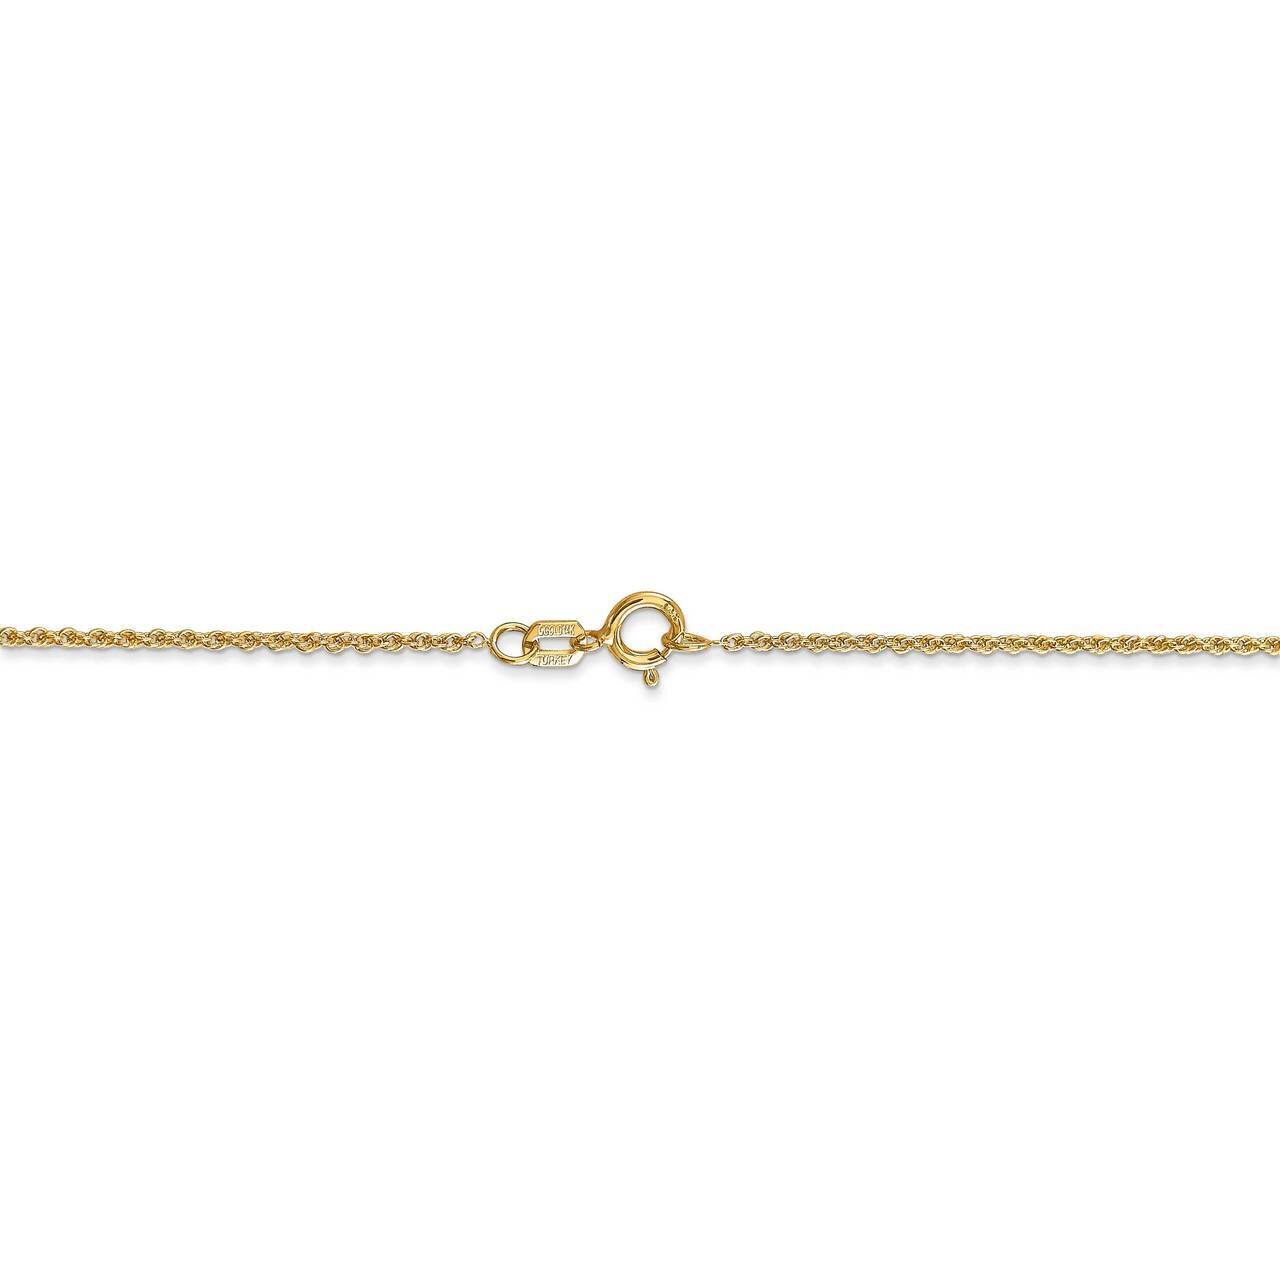 30 Inch 1.1mm Baby Rope Chain 14k Yellow Gold PEN173-30